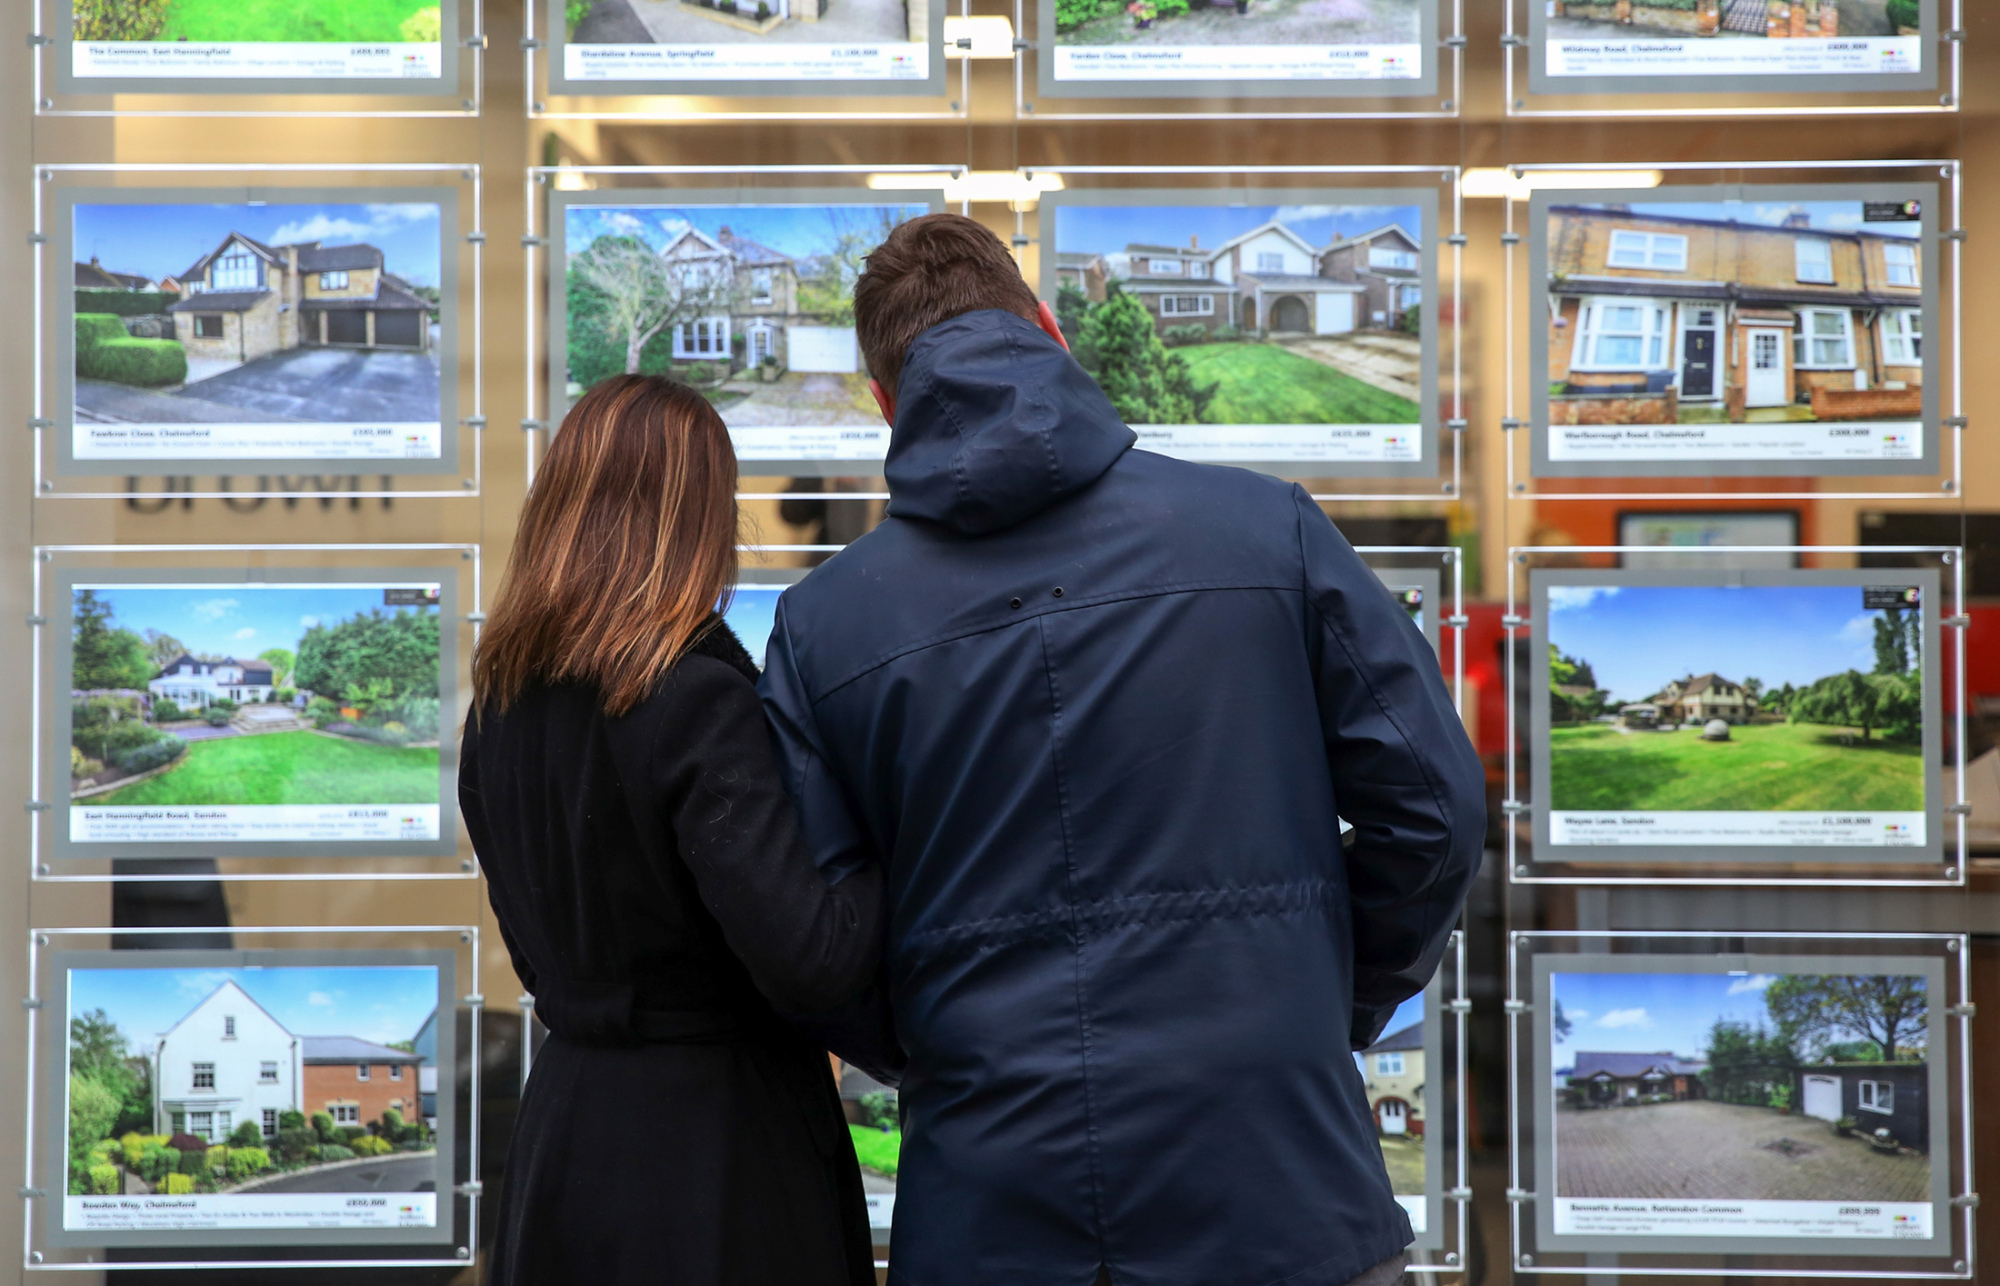 A couple look at houses for sale in the window of William H Brown estate agents in this arranged photograph in Chelmsford, U.K., on Tuesday, Dec. 15, 2015. U.K. asking prices rose an annual 7.4 percent in December amid a continuing shortage of homes for sale, according to Rightmove.
